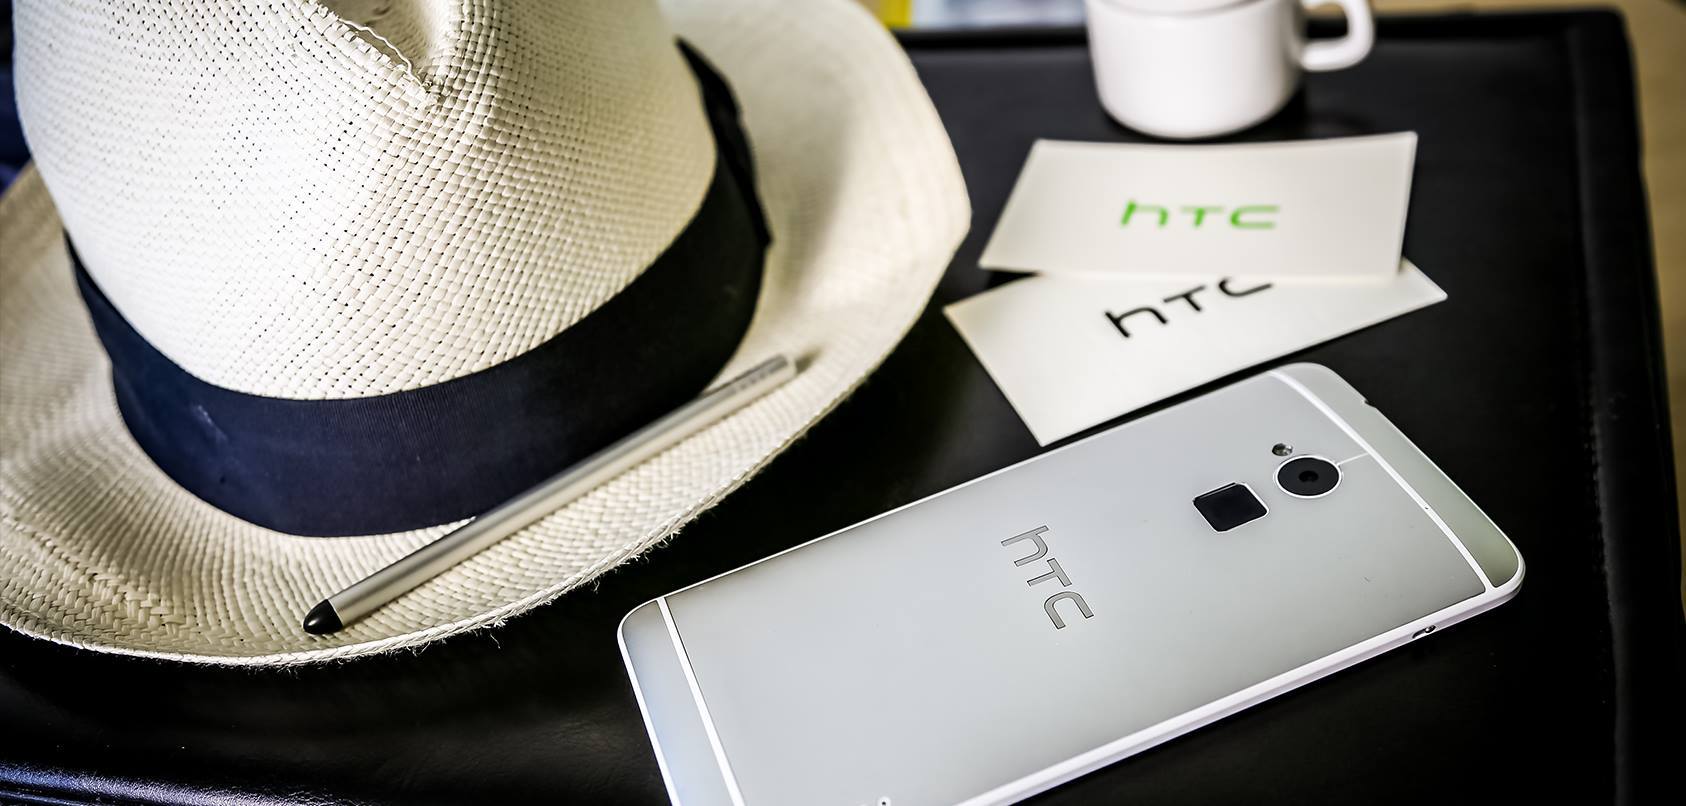 HTC One max hands-on